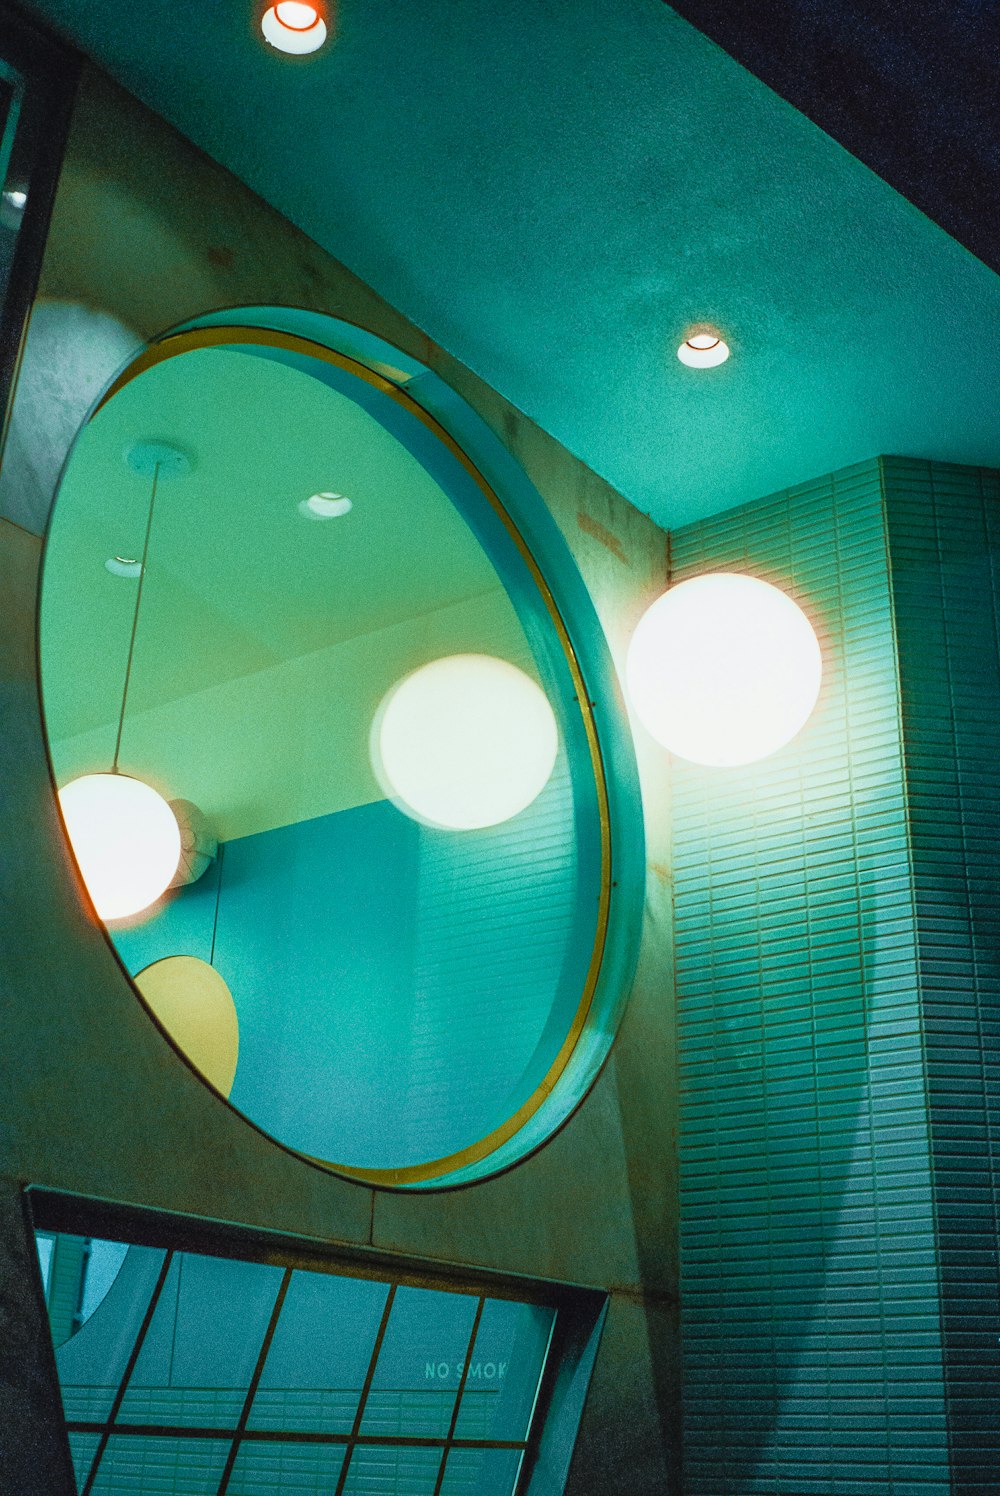 a circular mirror hanging from the side of a wall